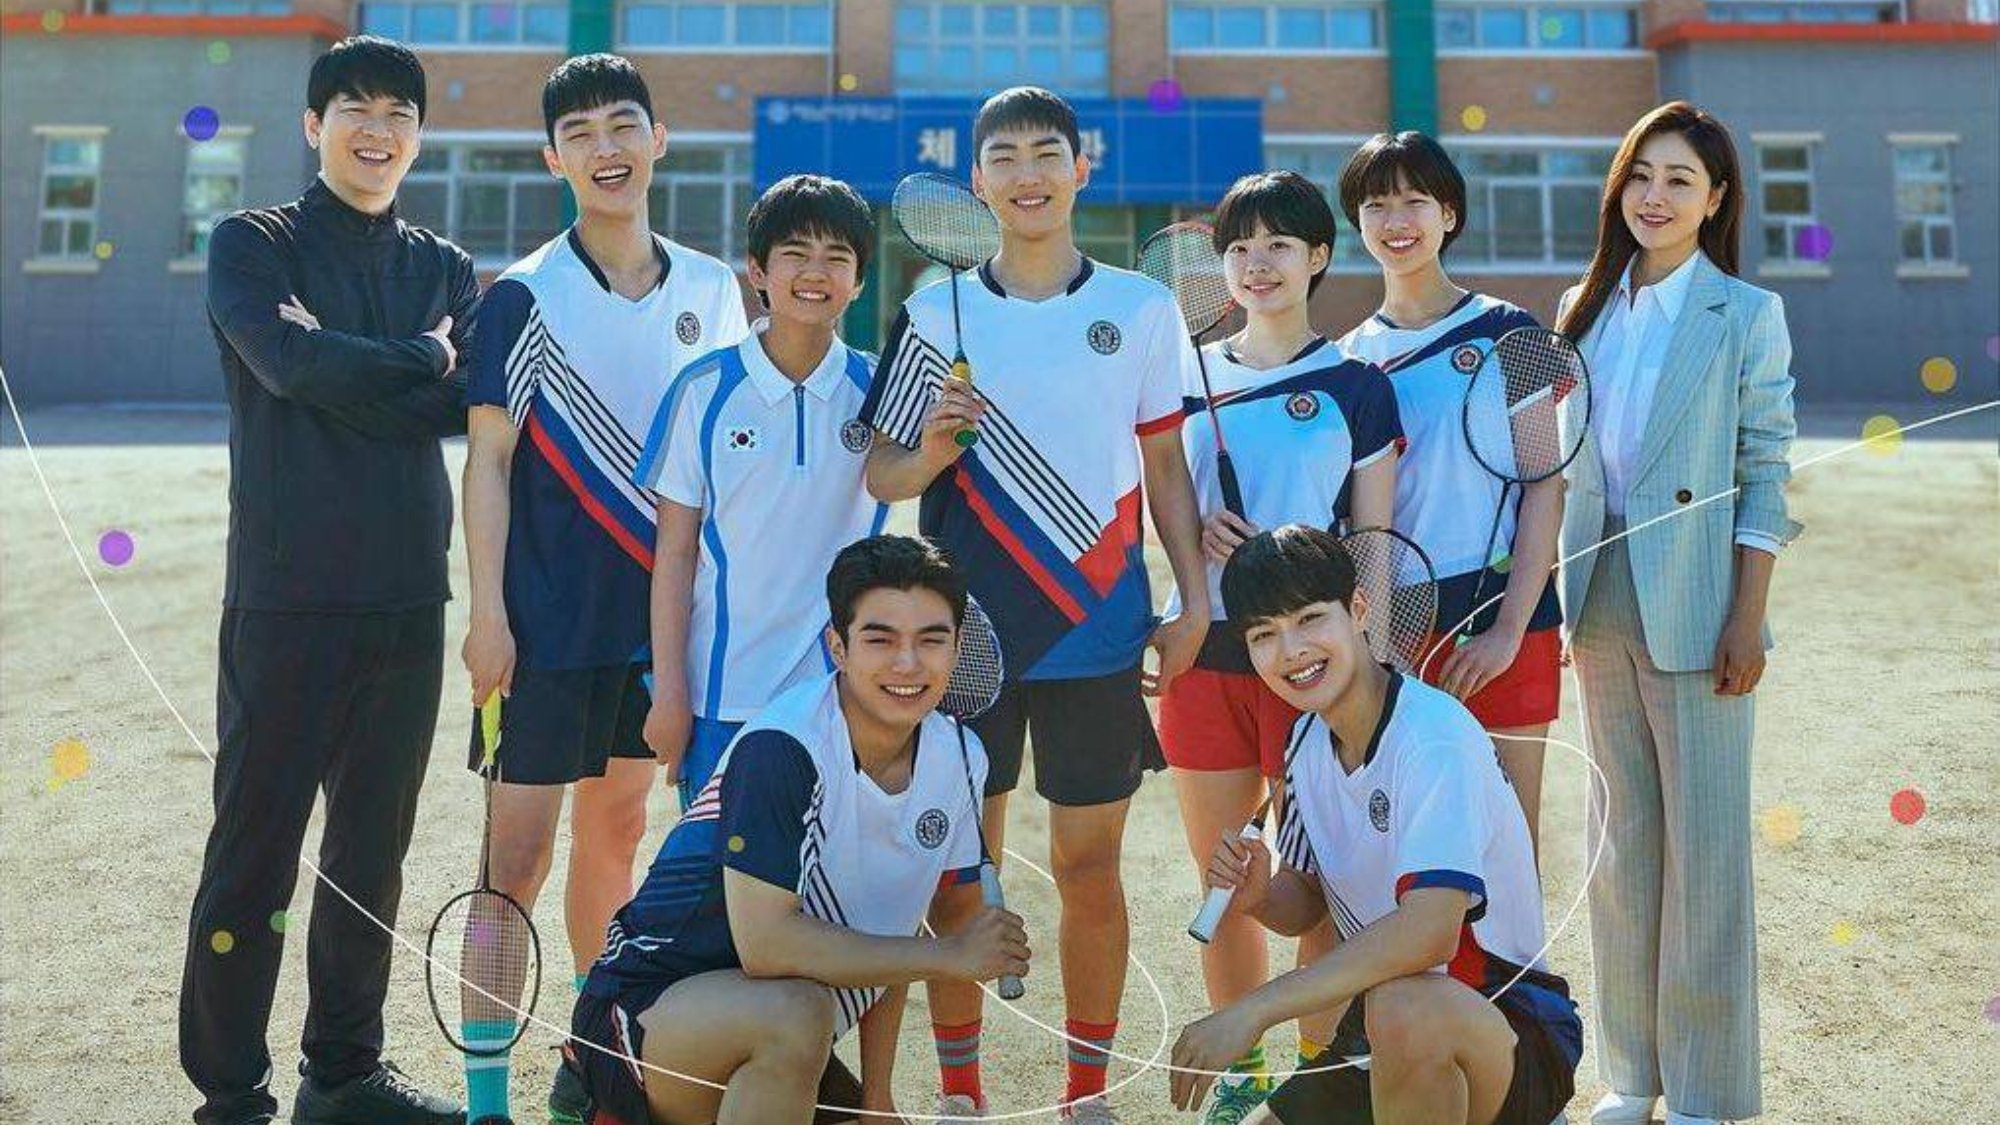 Main cast of the sport and 'Slice of Life' K-drama 'Racket Boys'